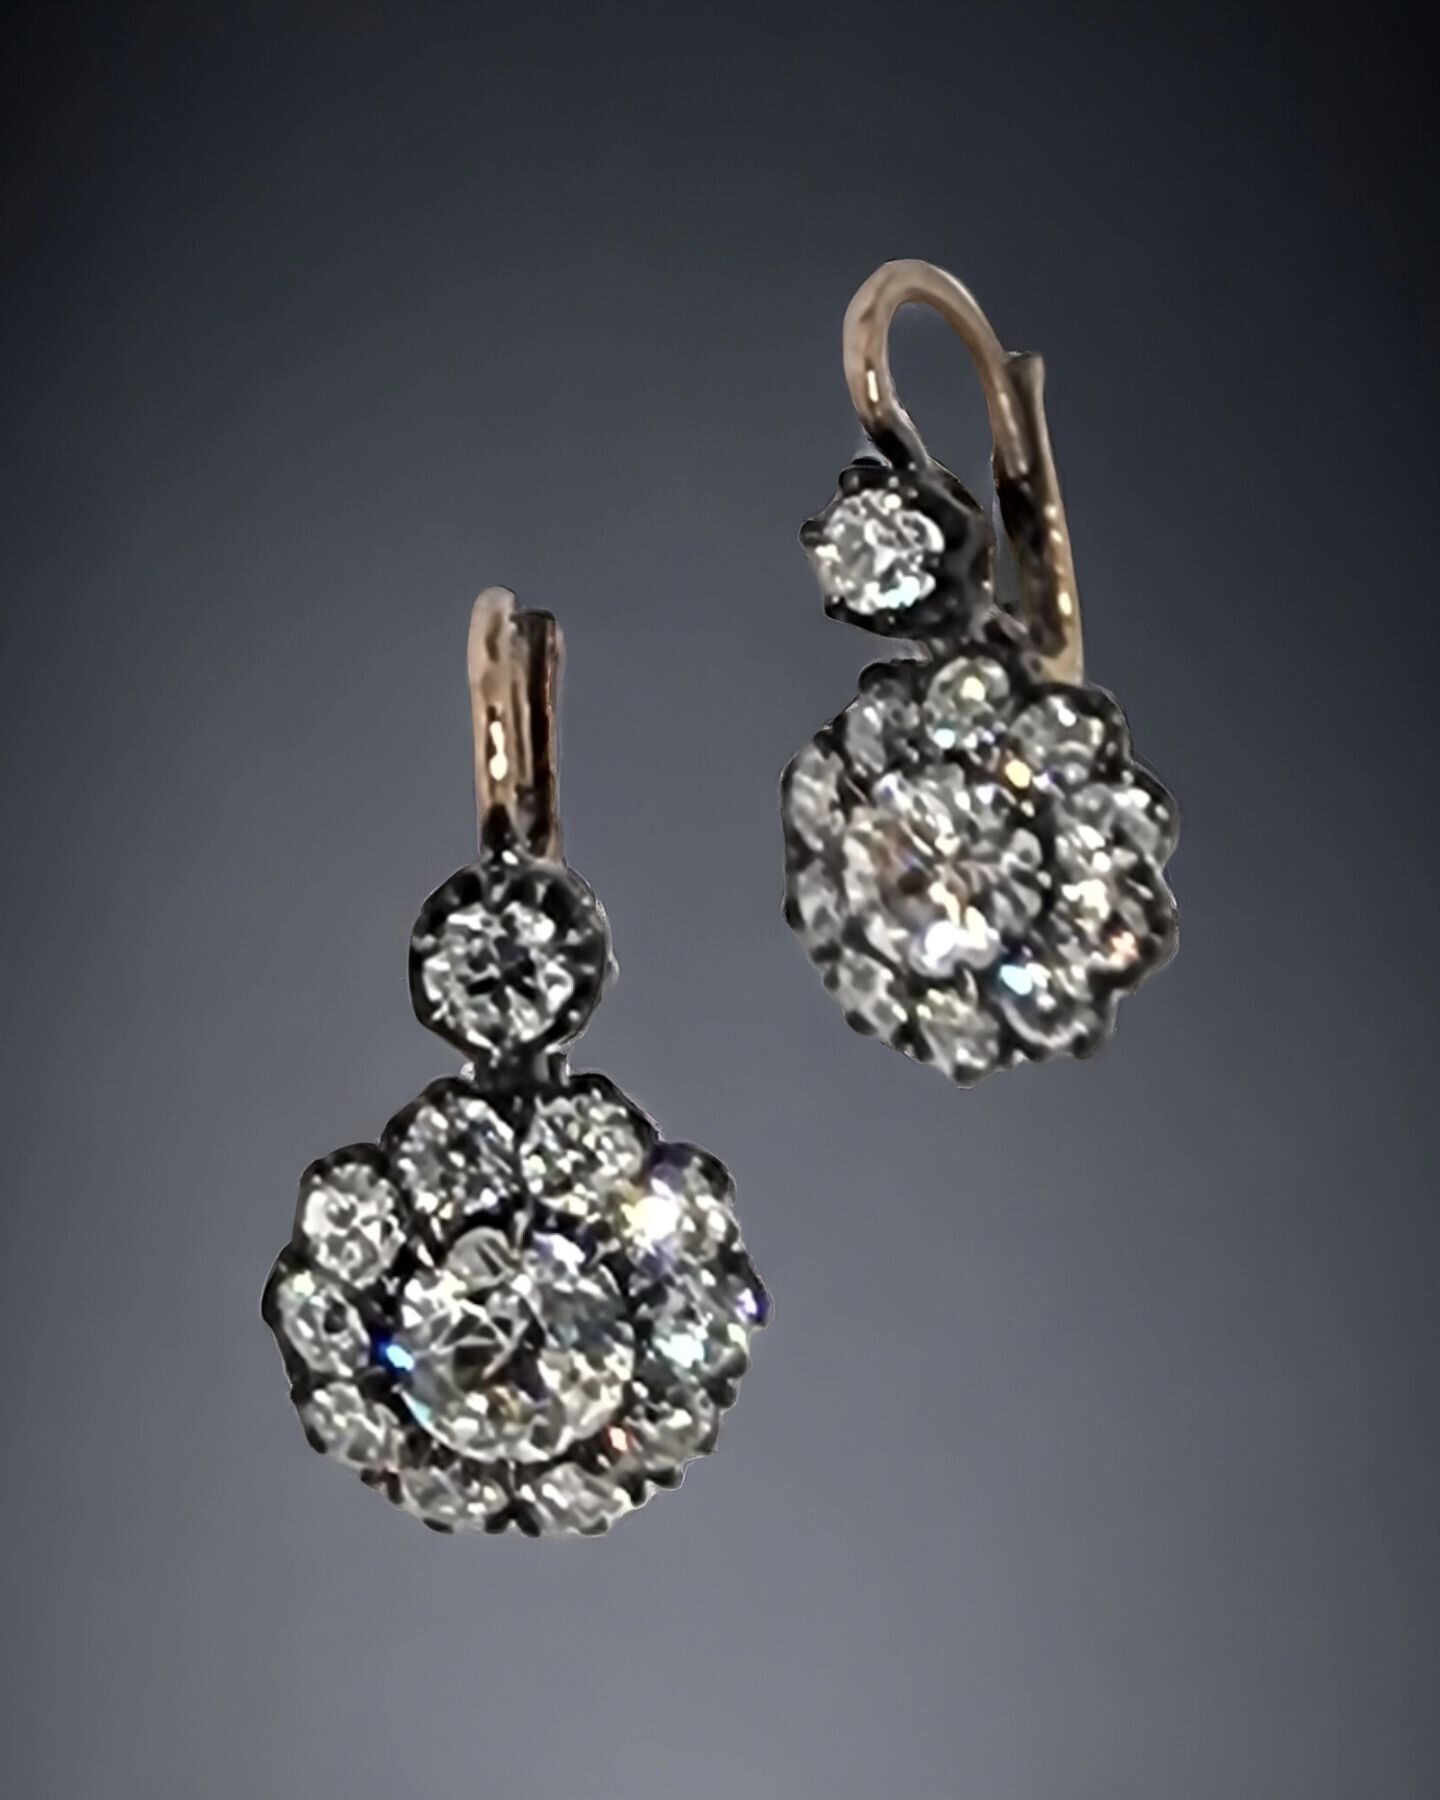 Old cut diamond Dormeuses for today and tonight.
The only pair of diamond earrings you need, if you only need one pair.
We have a few of these drop earrings in our collection nowadays, so simply DM and we will start a conversation to find YOUR perfec